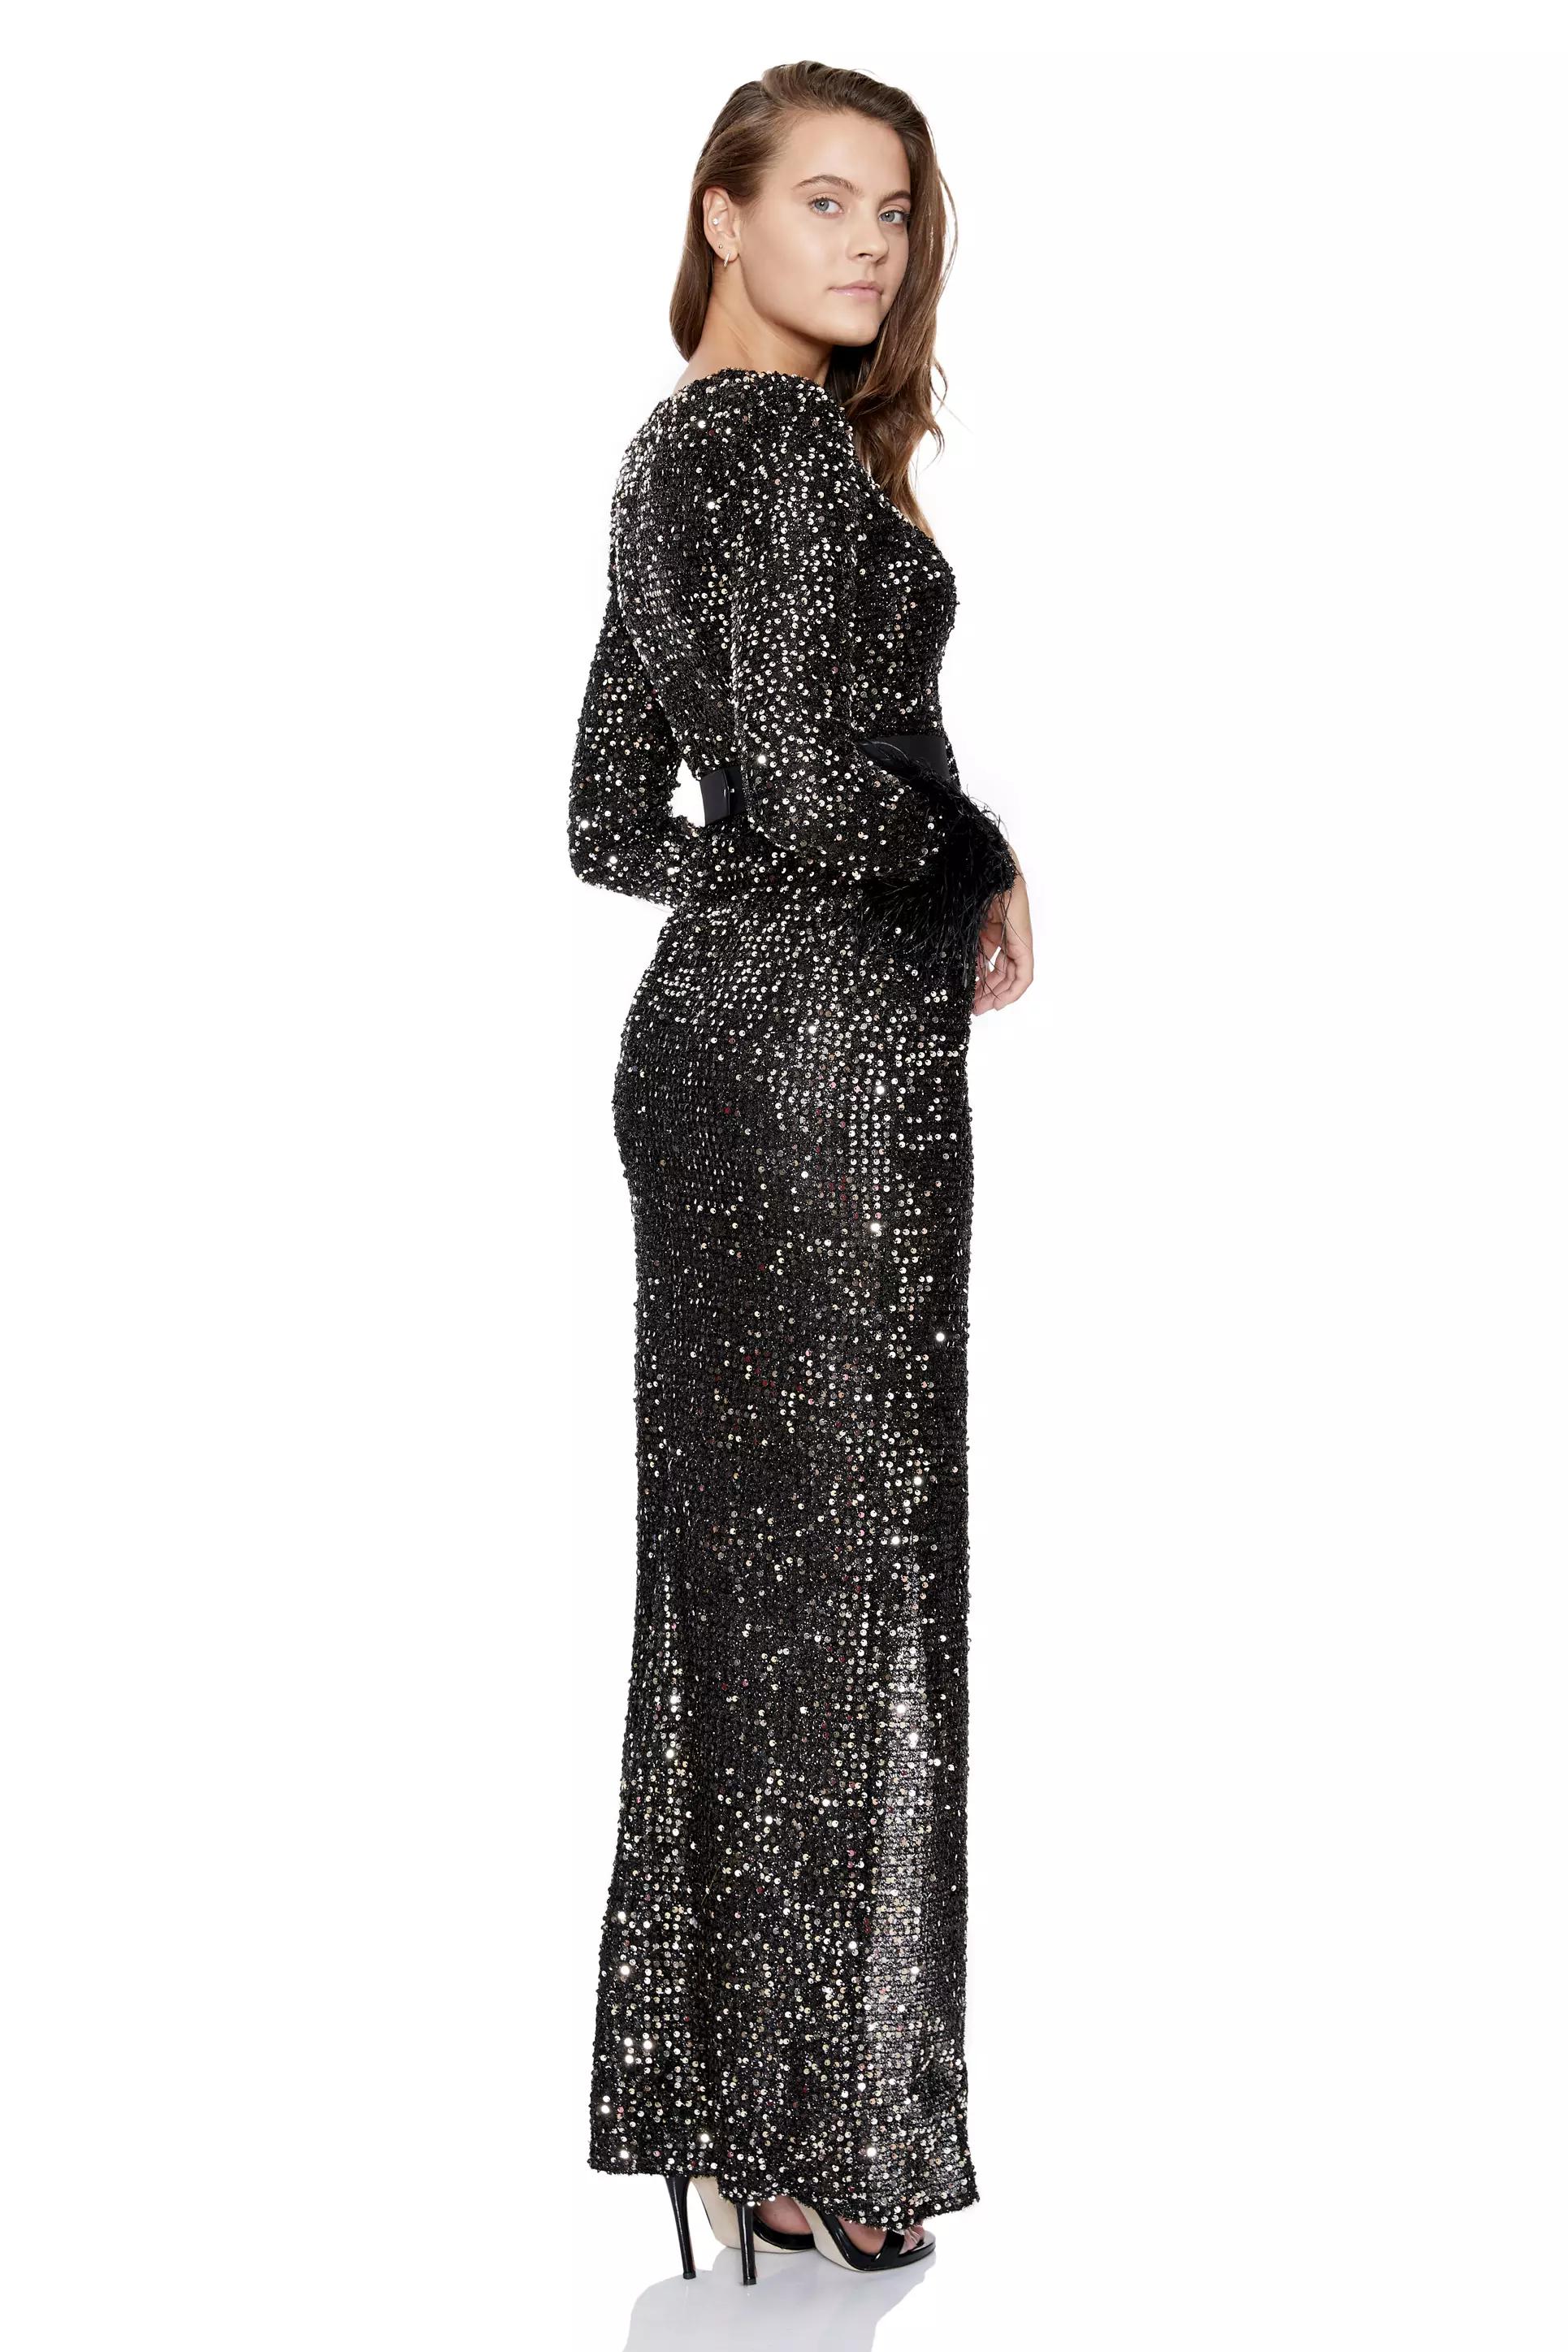 Silver Sequined Long Sleeve Dress